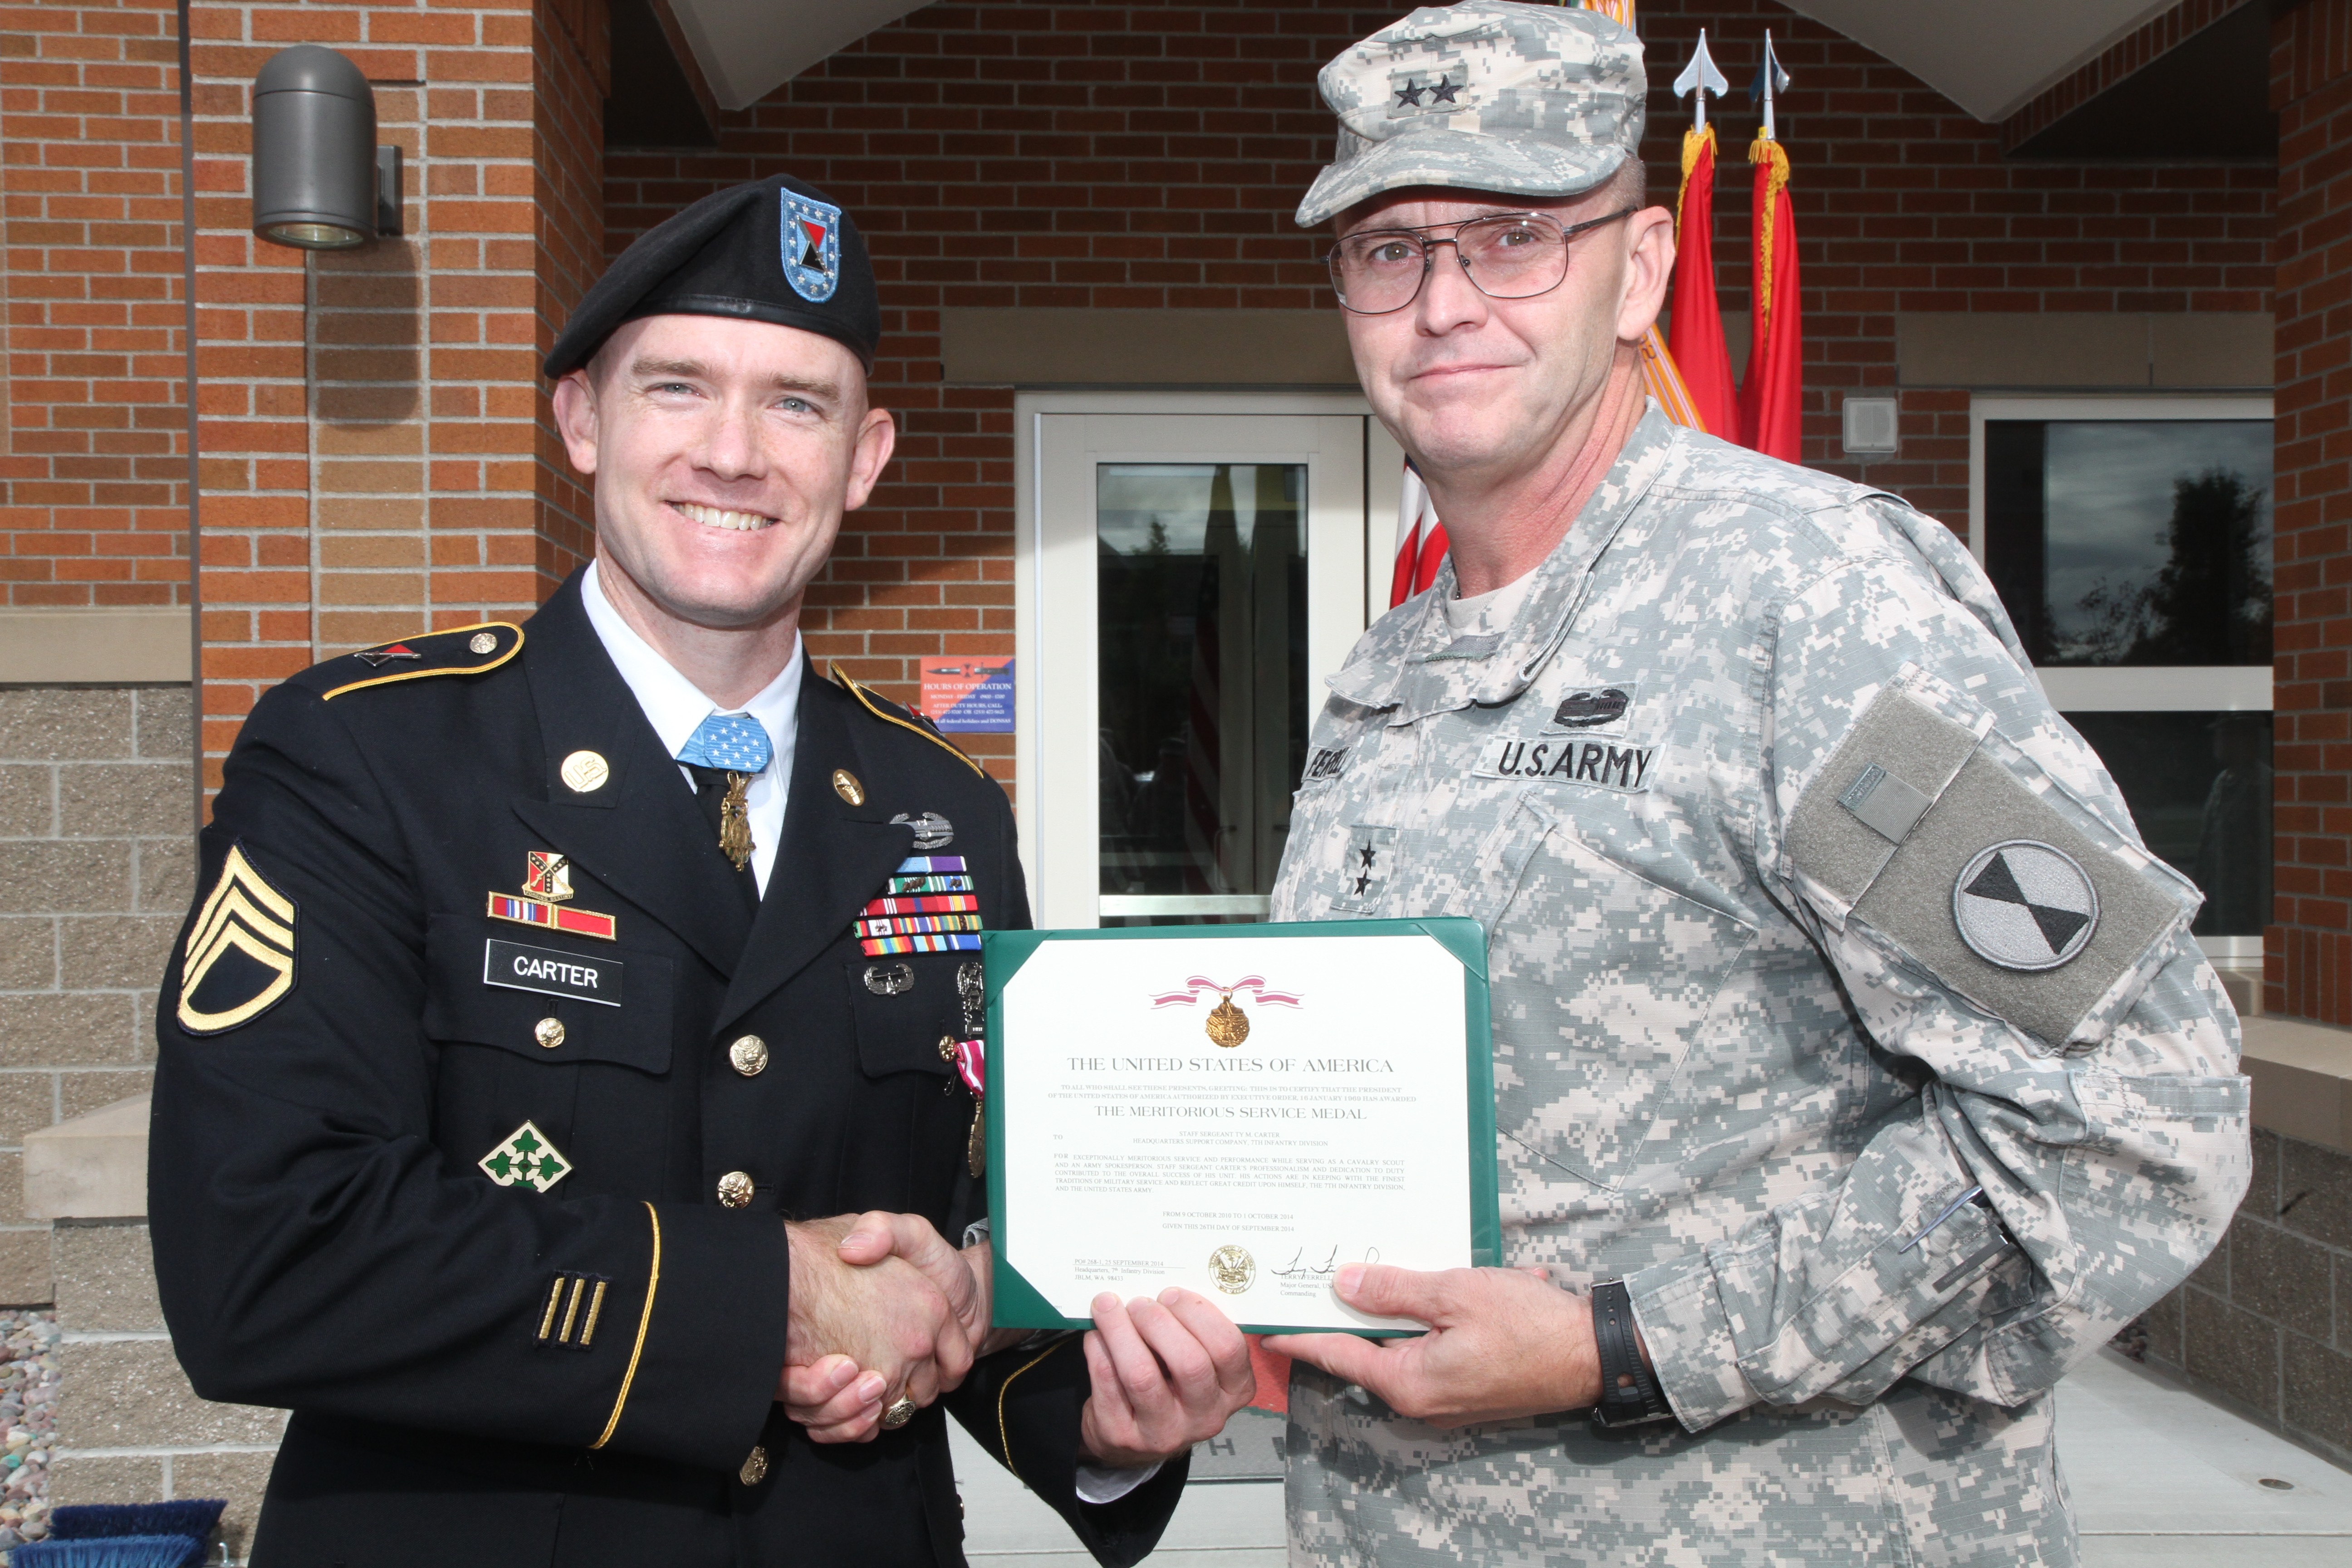 Staff Sgt. Ty Carter receives the Meritorious Service Medal Article